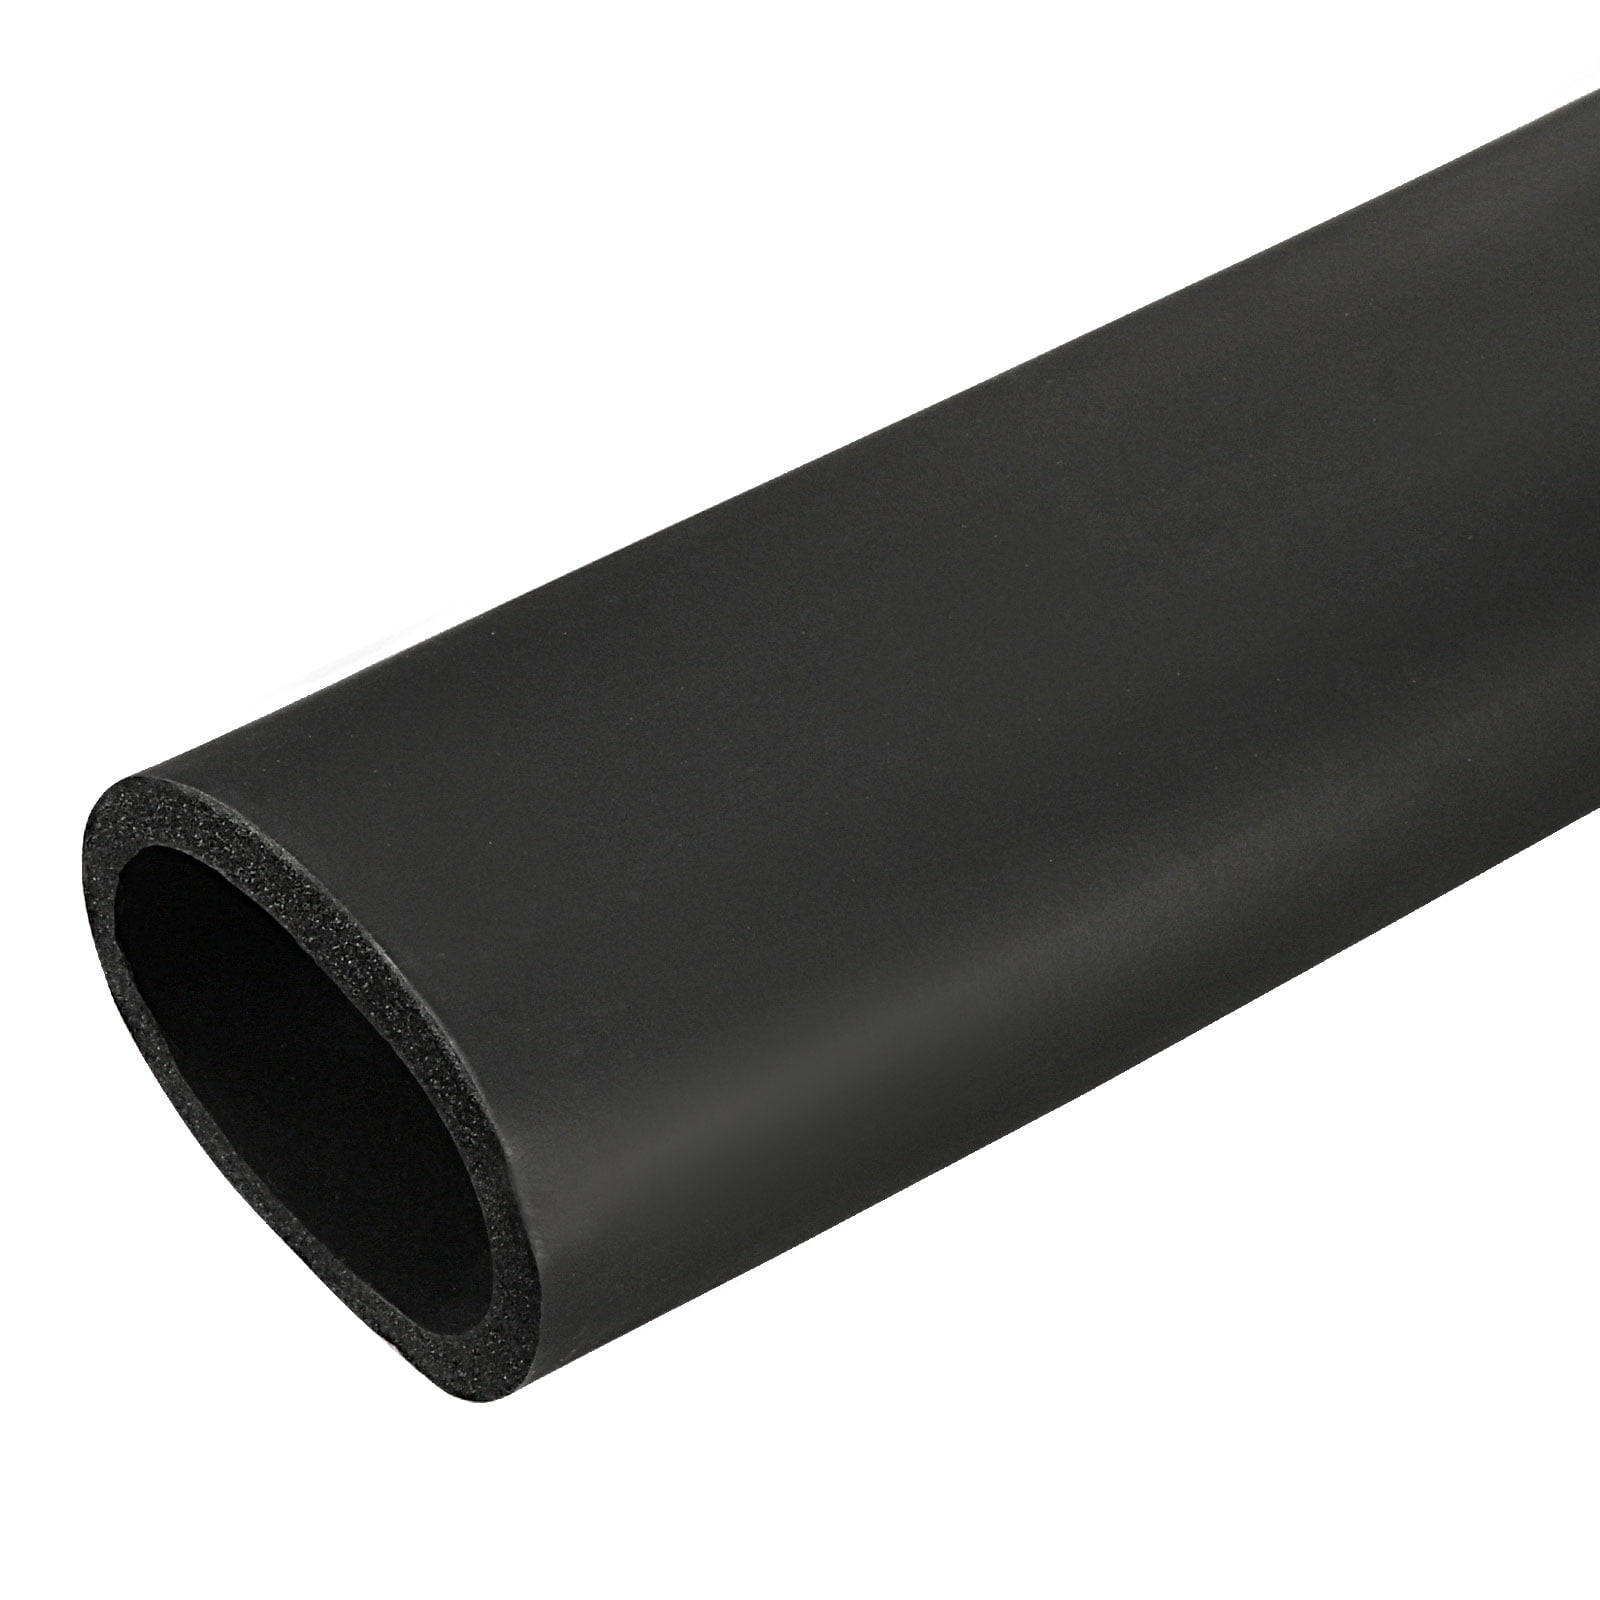 Rock Wool Insulation Pipe Waterproof/Fireproof, Fiberglass Pipe Insulation  ID 27mm-114mm Wall 30mm/50mm, Easy to Install, Foam Tube Self Adhesive for